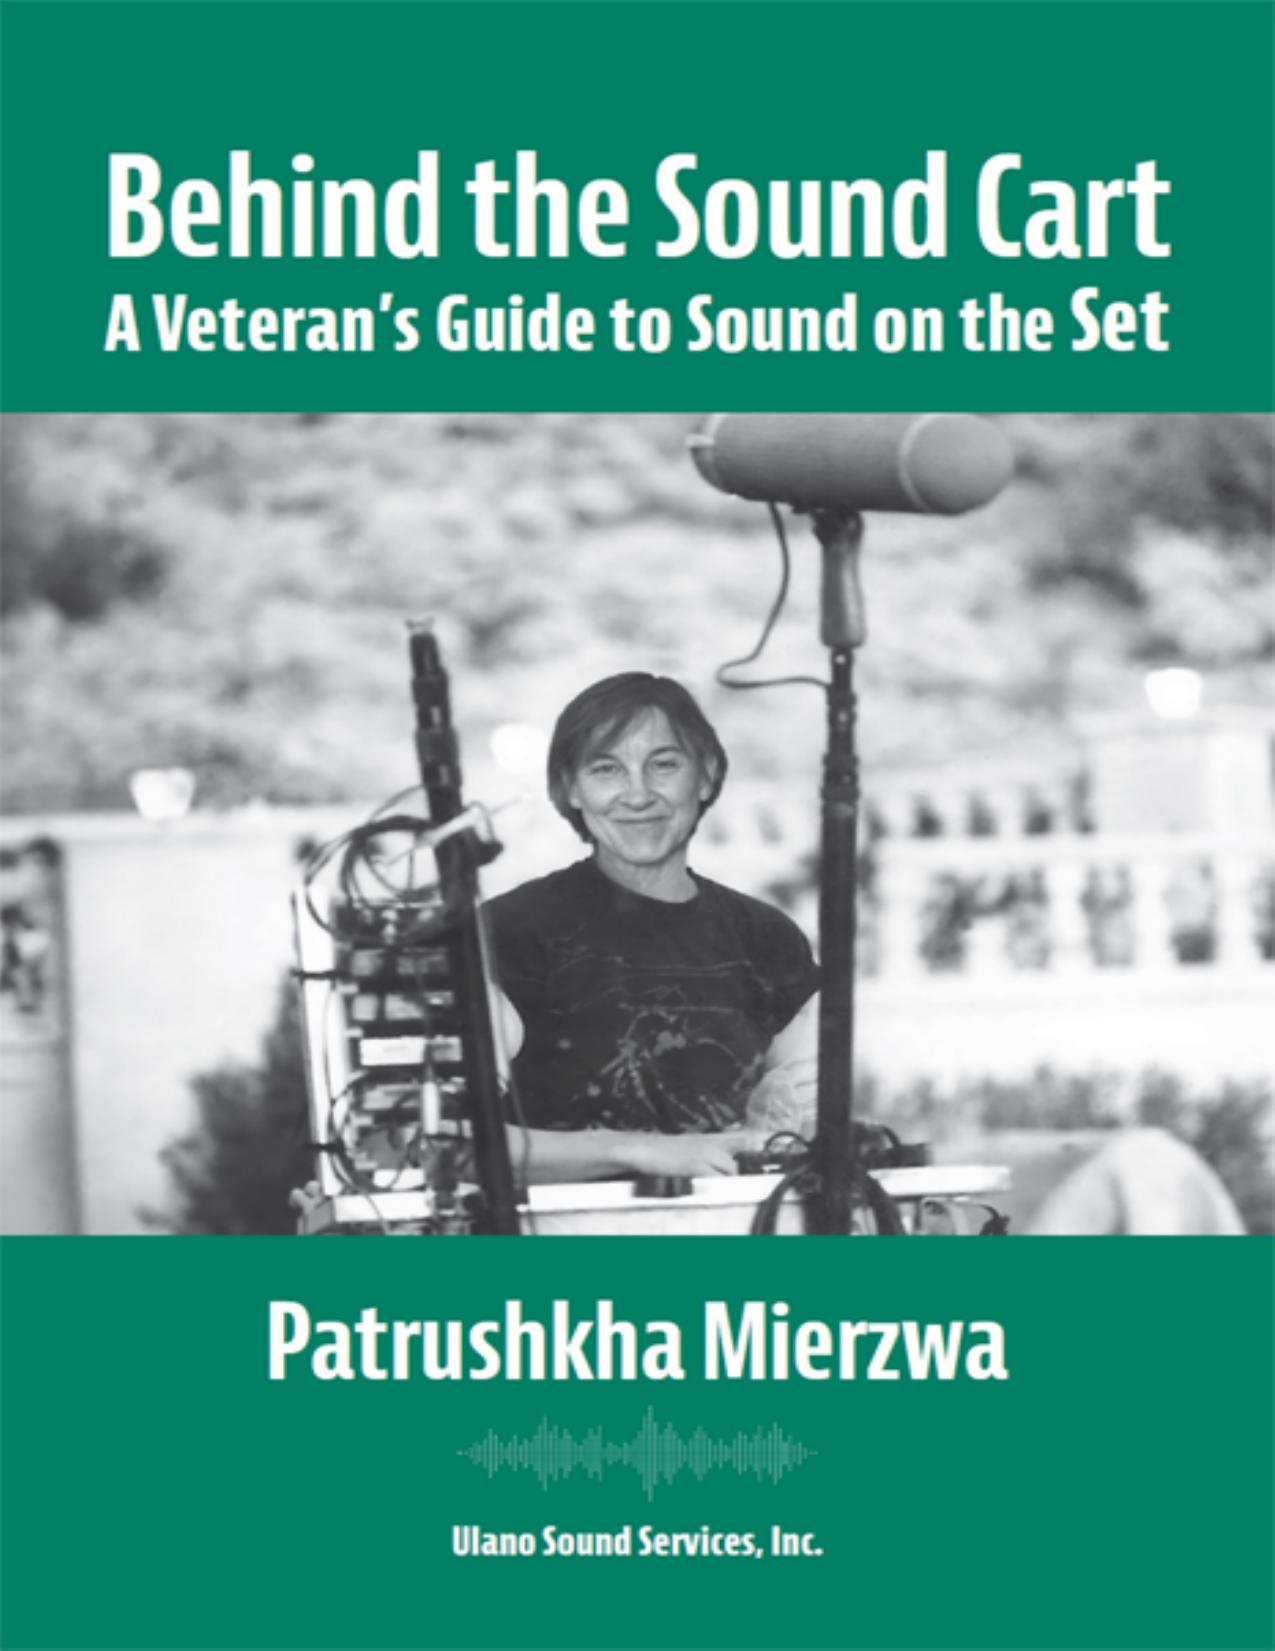 Behind the Sound Cart a Veteran's Guide to Sound on the Set by Mierzwa Patrushkha